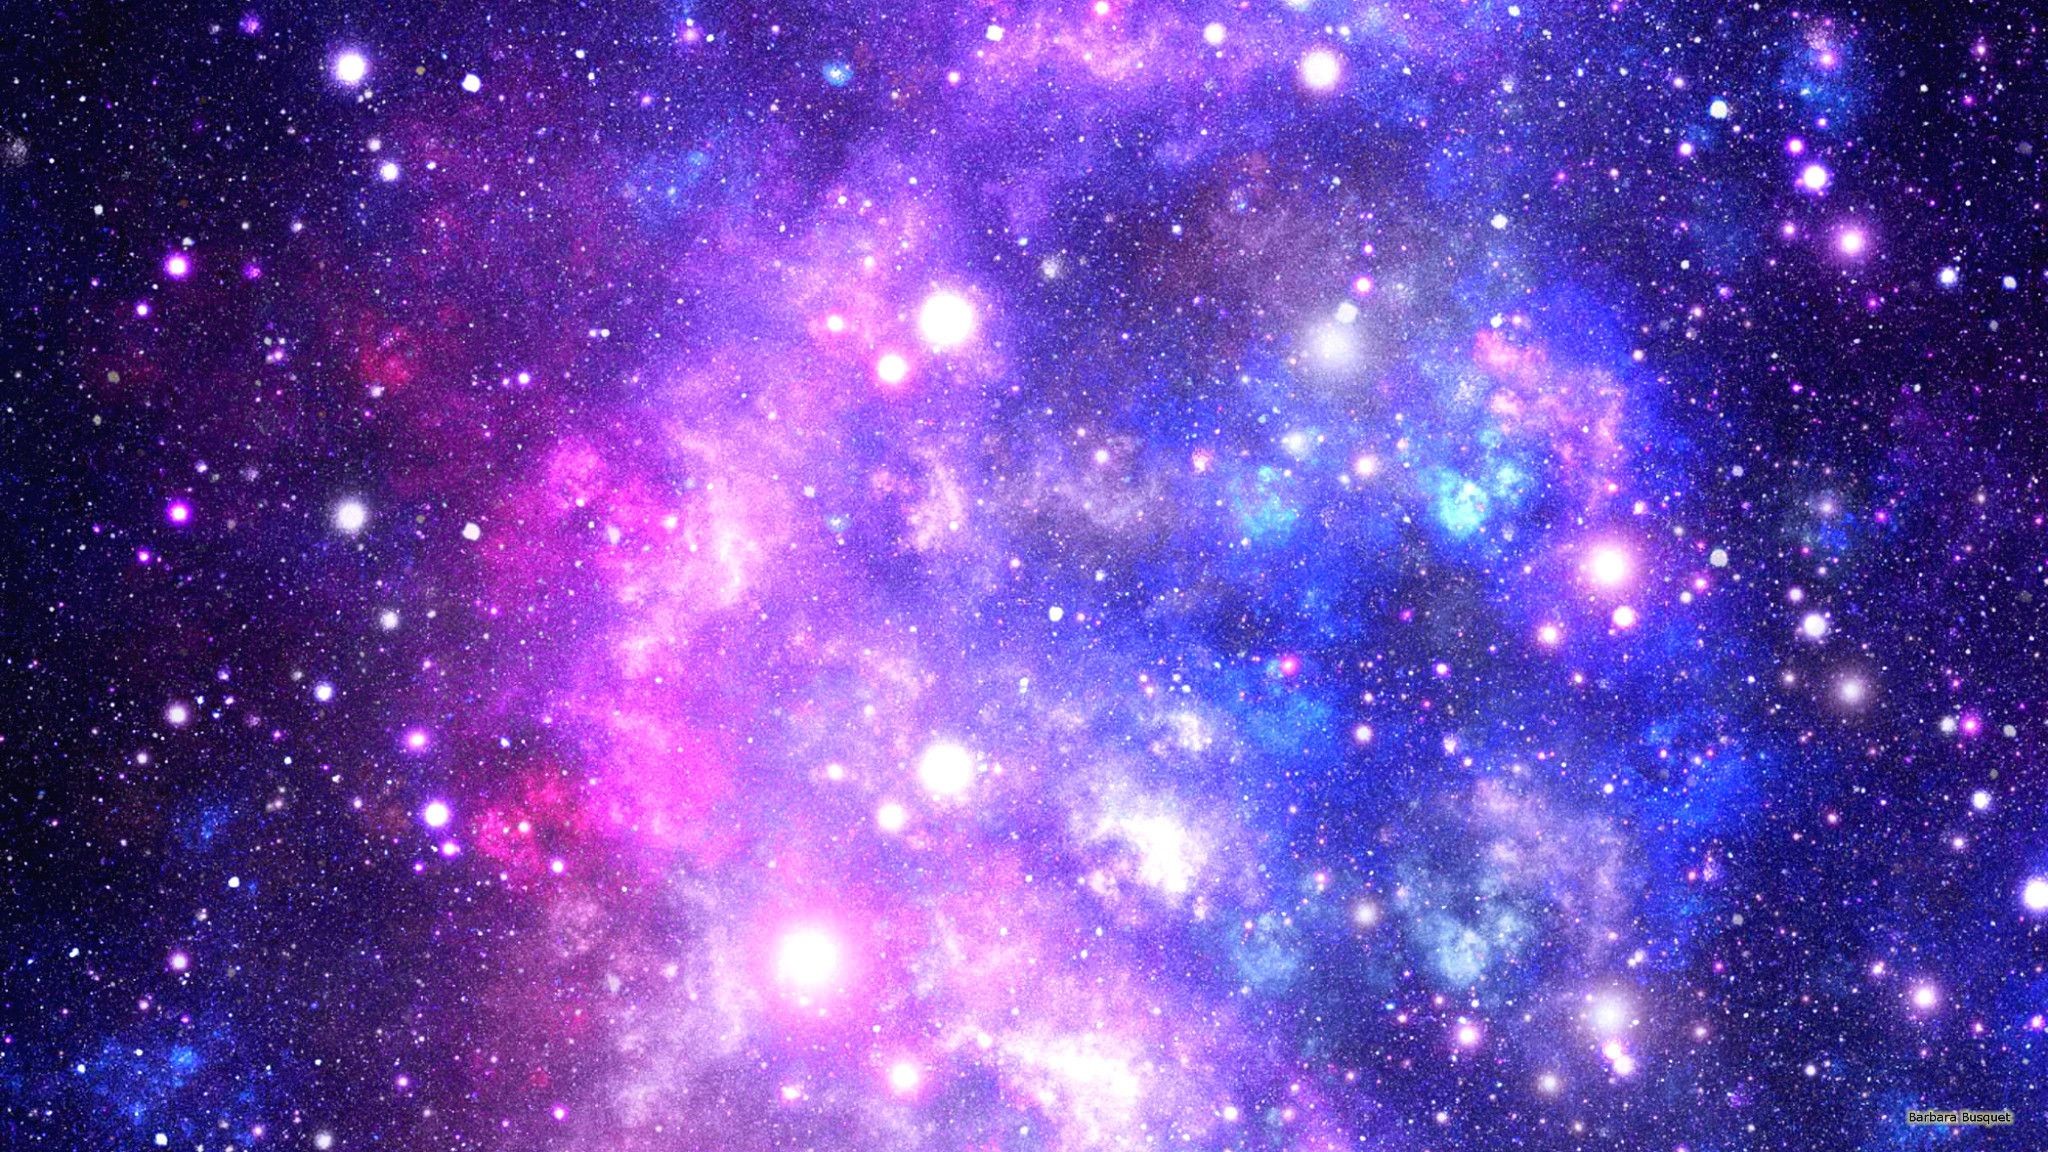 Trippy Wallpaper For Galaxy Pictures